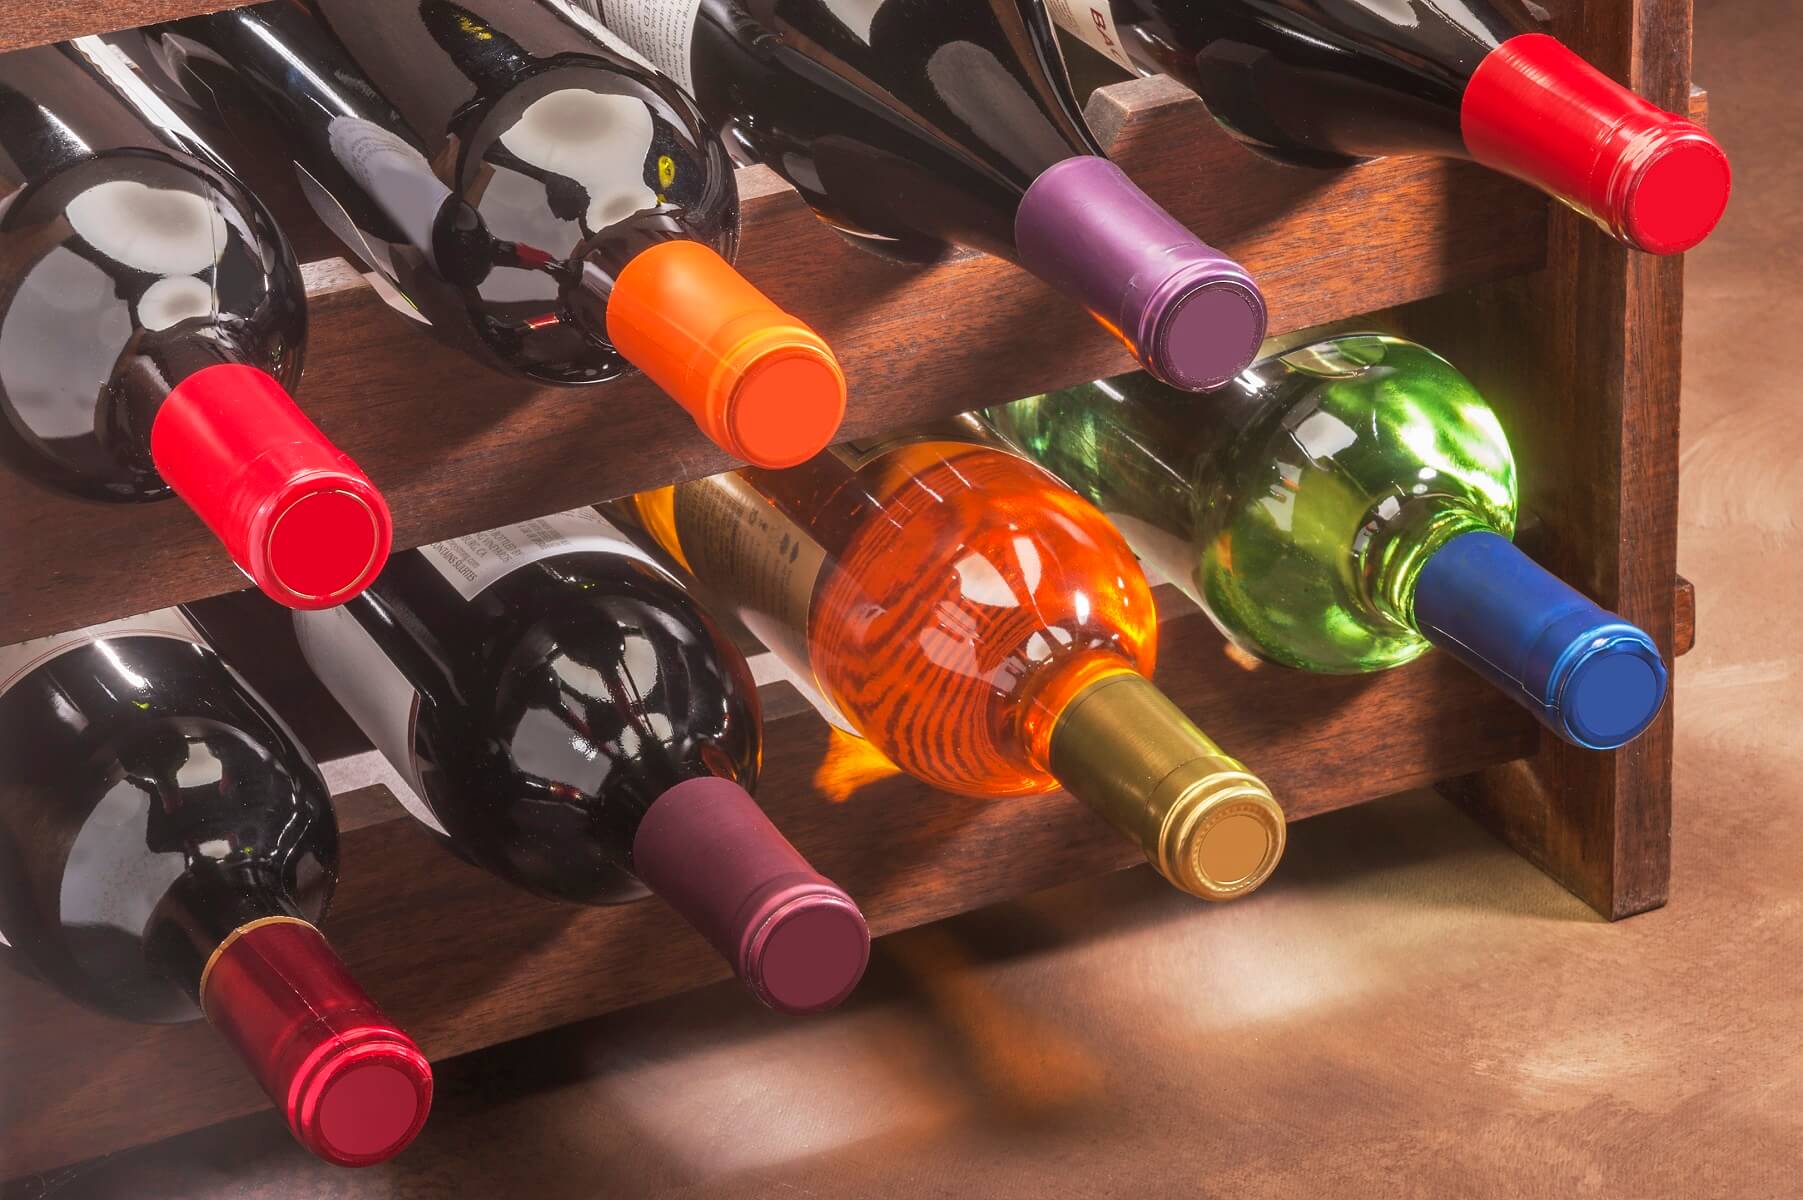 What’s With All The Different Coloured Wine Bottles?